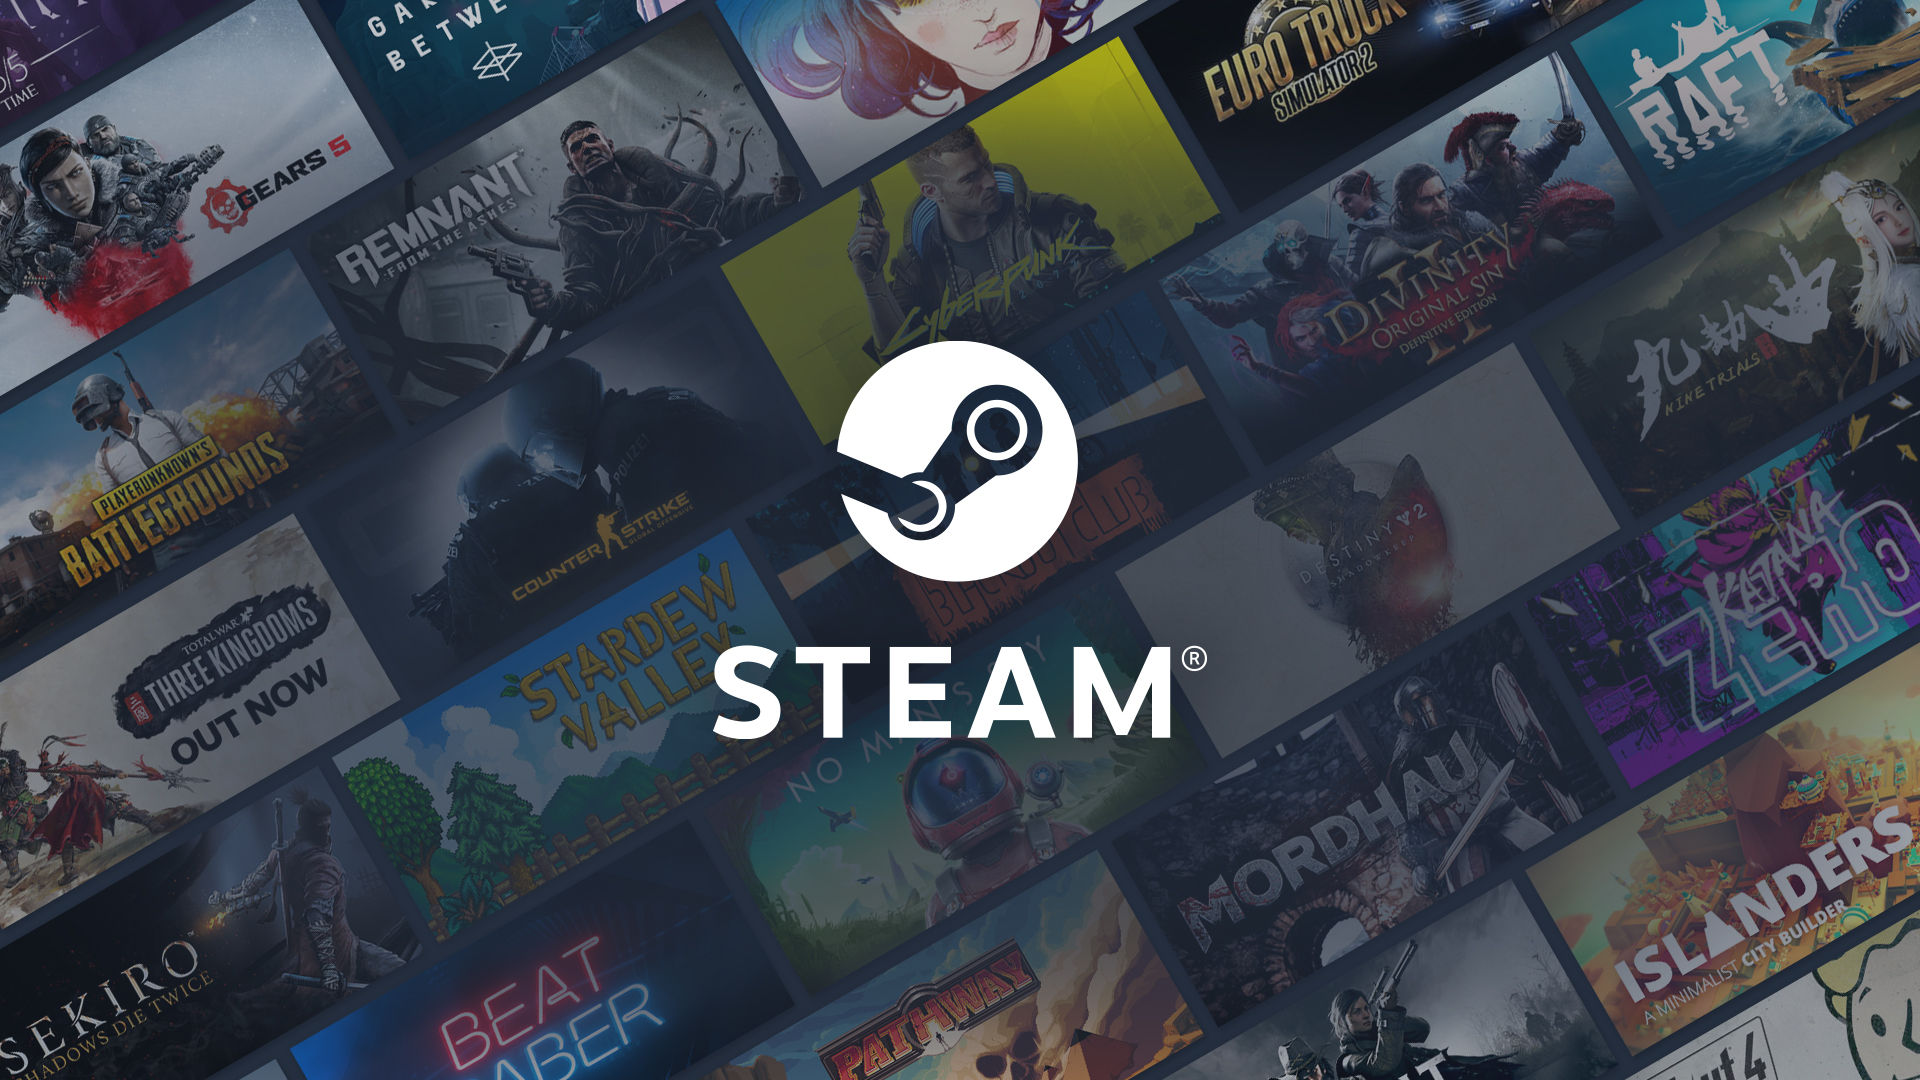 How To Check How Much You Have Spent On The Steam Store